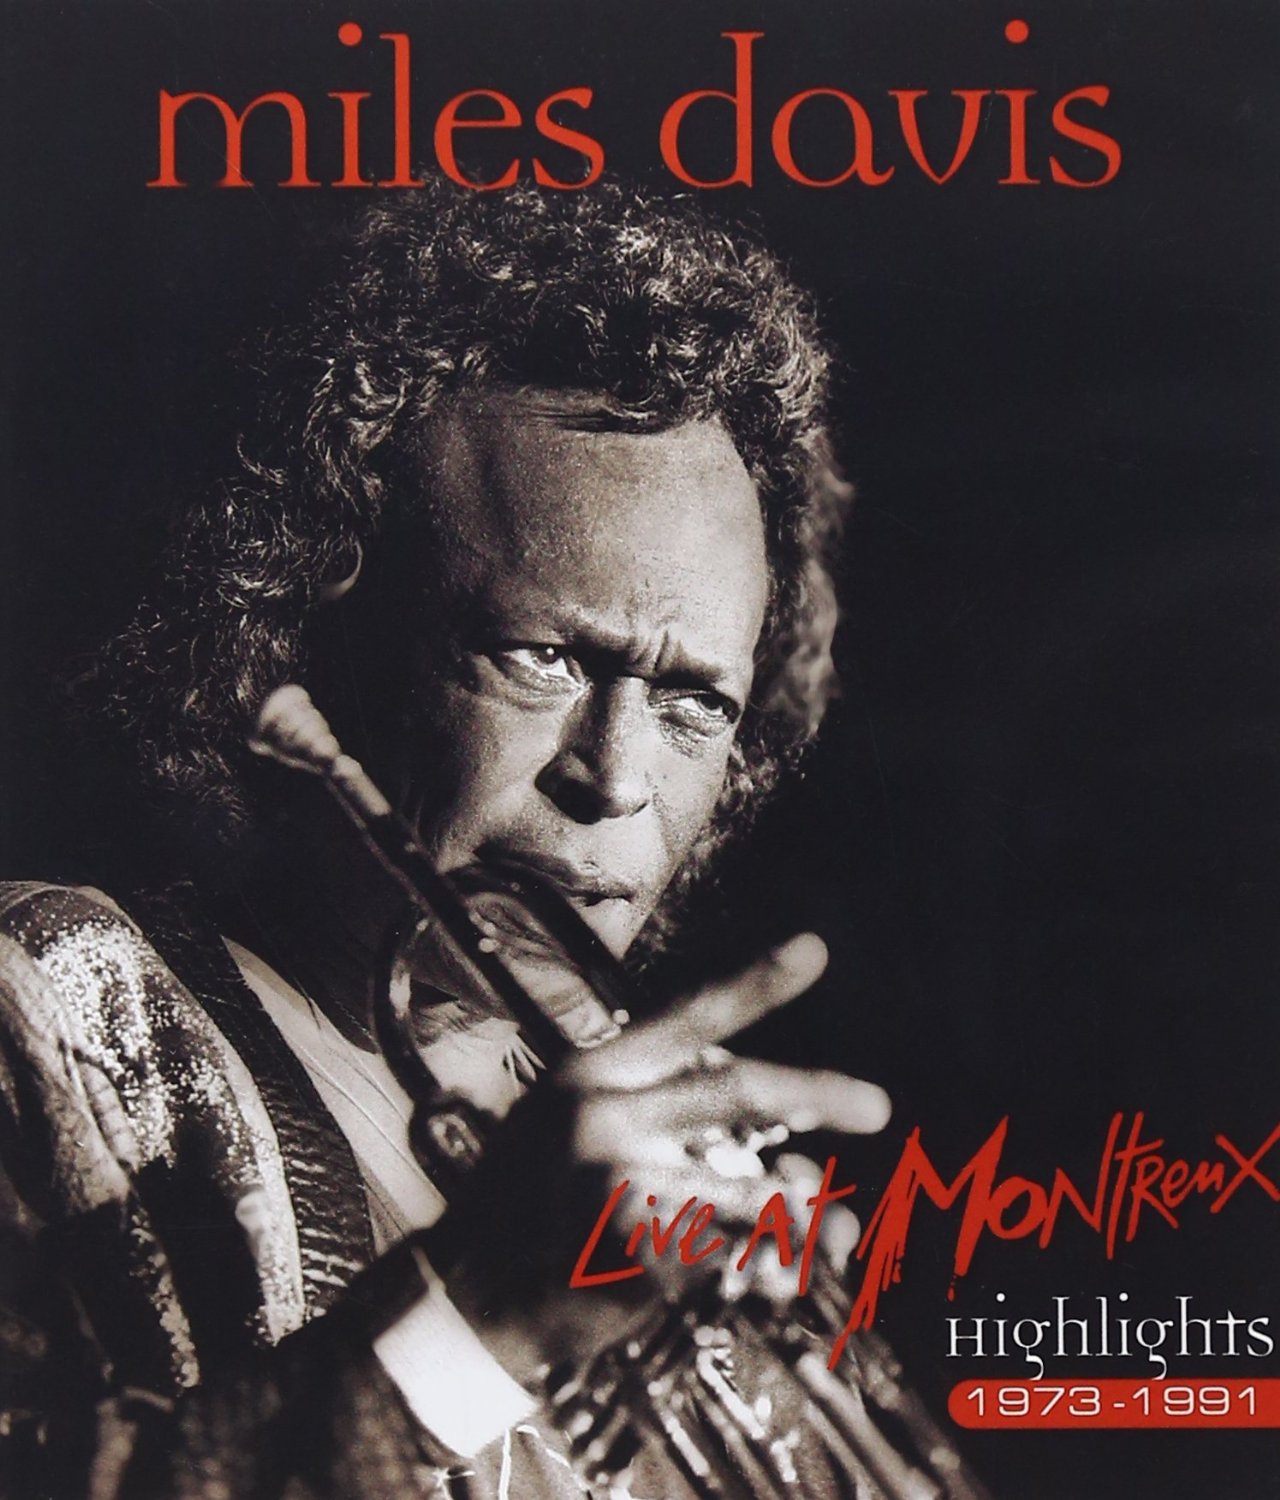 MILES DAVIS - Live at Montreux: Highlights 1973-1991 cover 